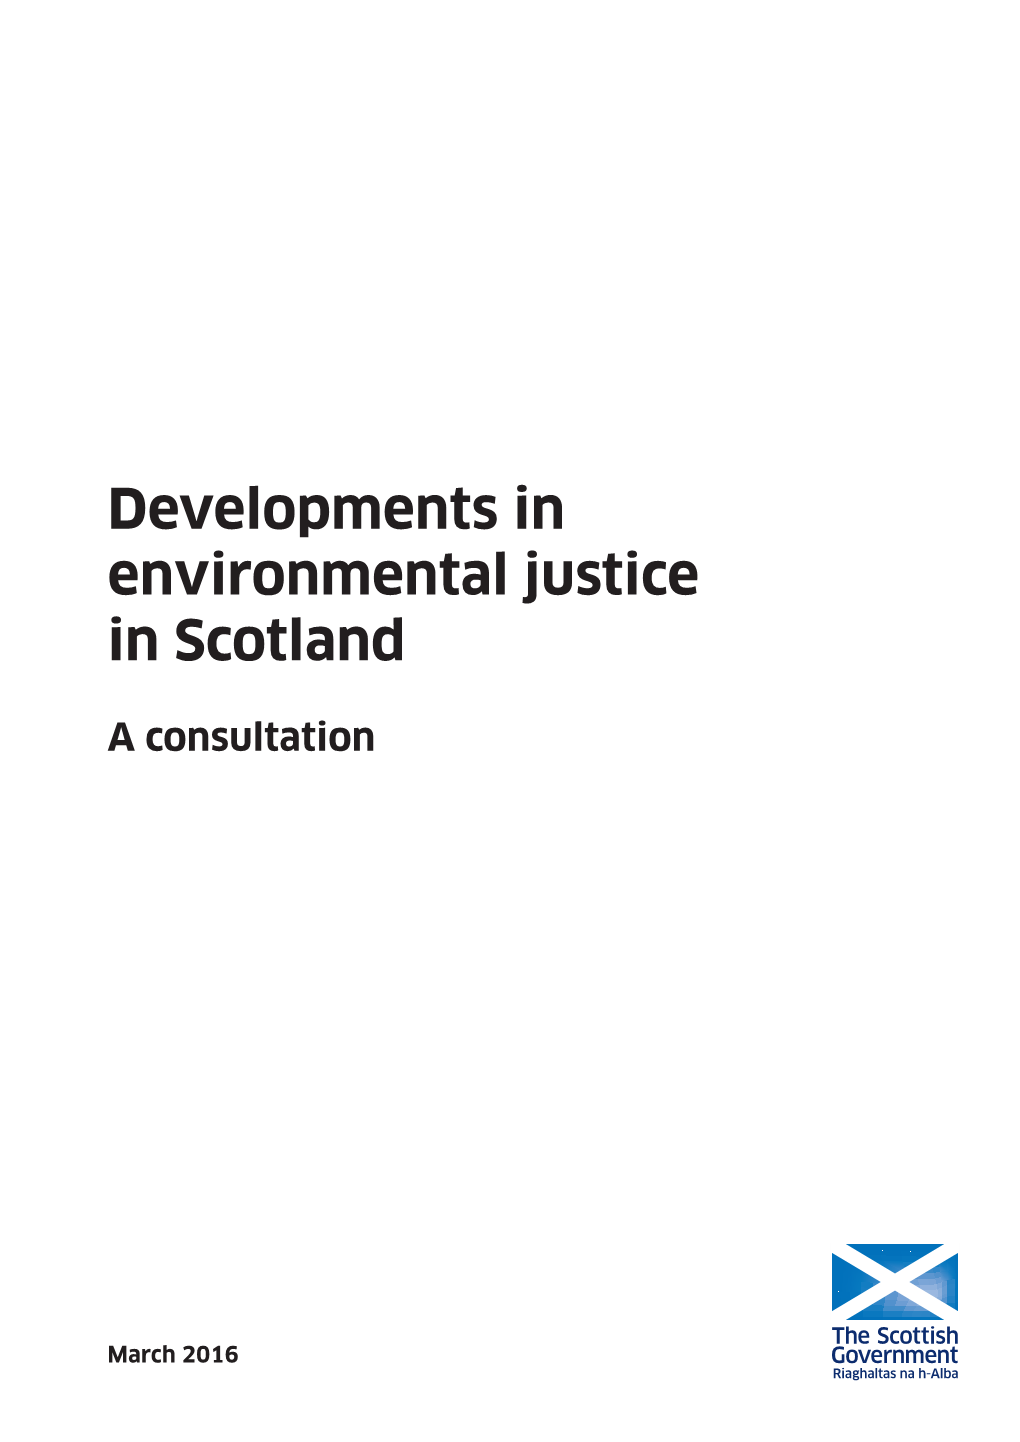 Developments in Environmental Justice in Scotland: a Consultation